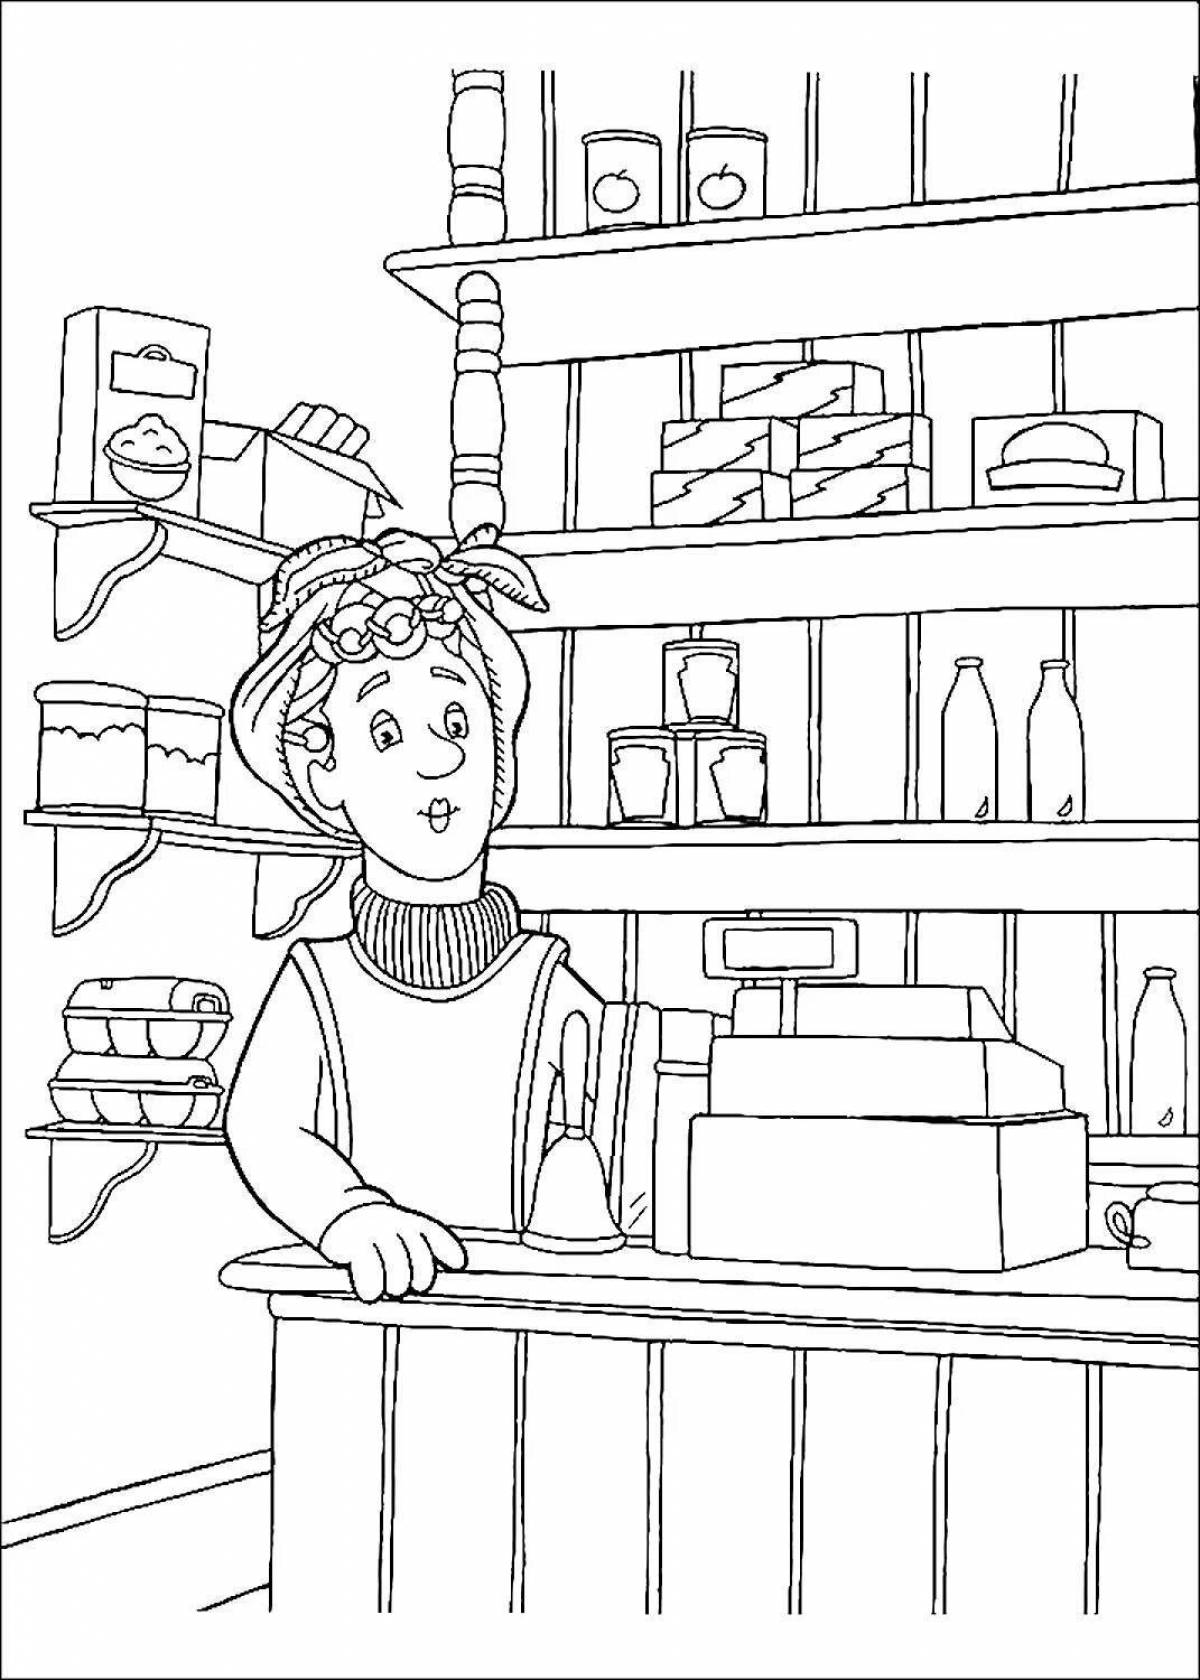 Coloring page cheerful supermarket